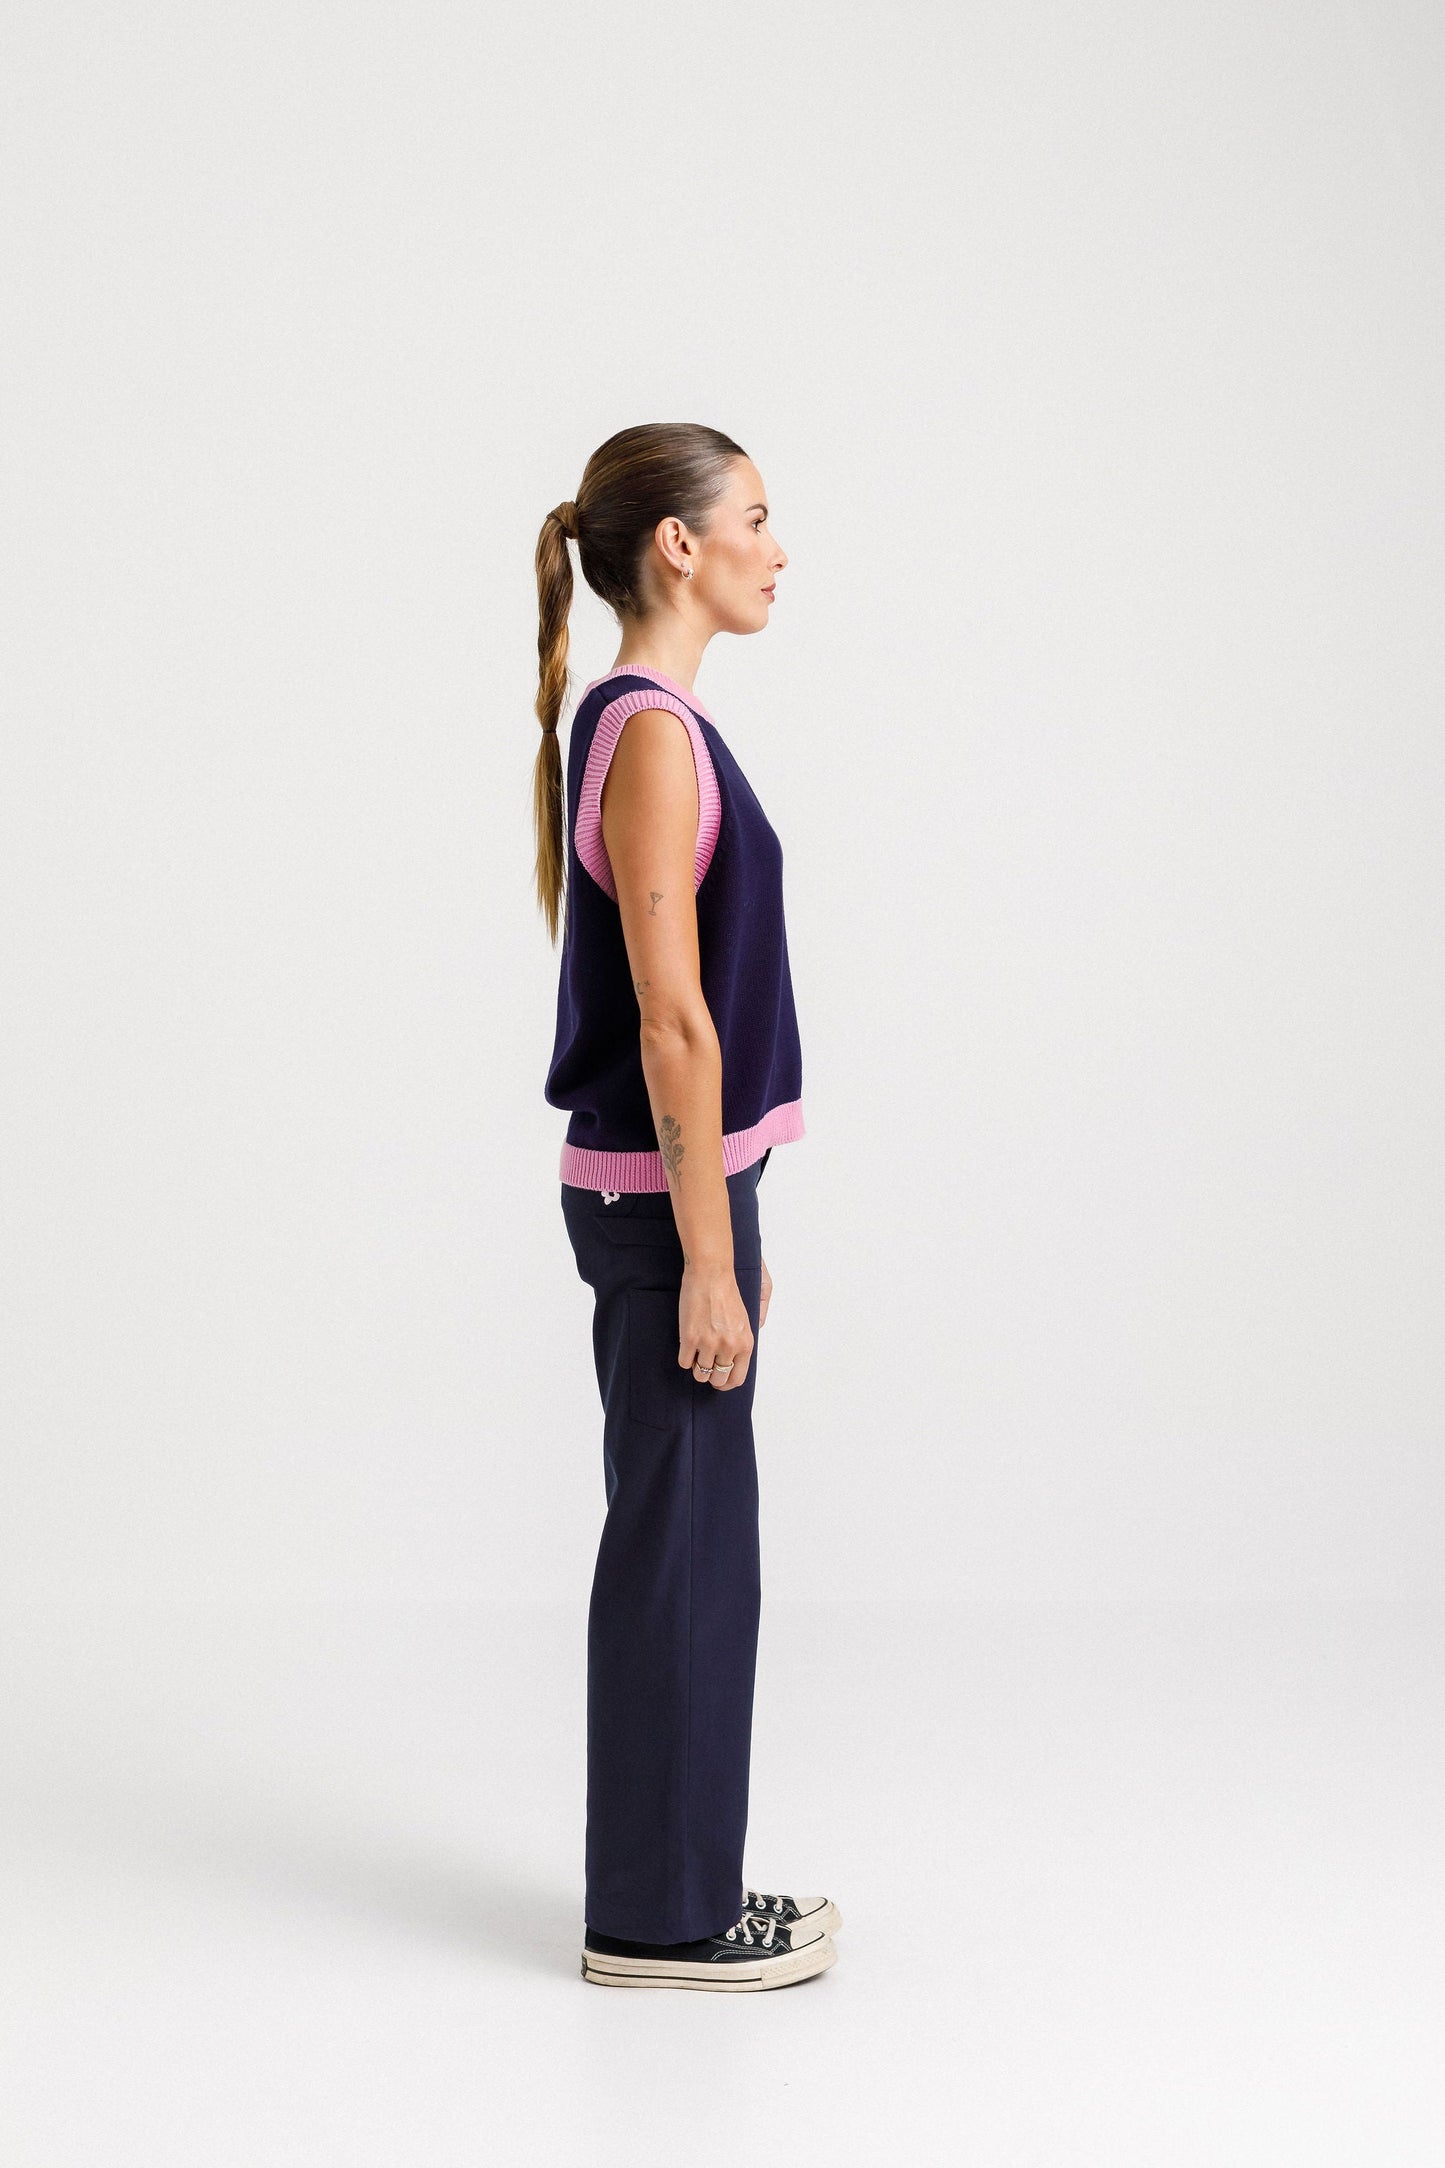 THING THING SPRING FLING VEST - BALLET NAVY - THE VOGUE STORE